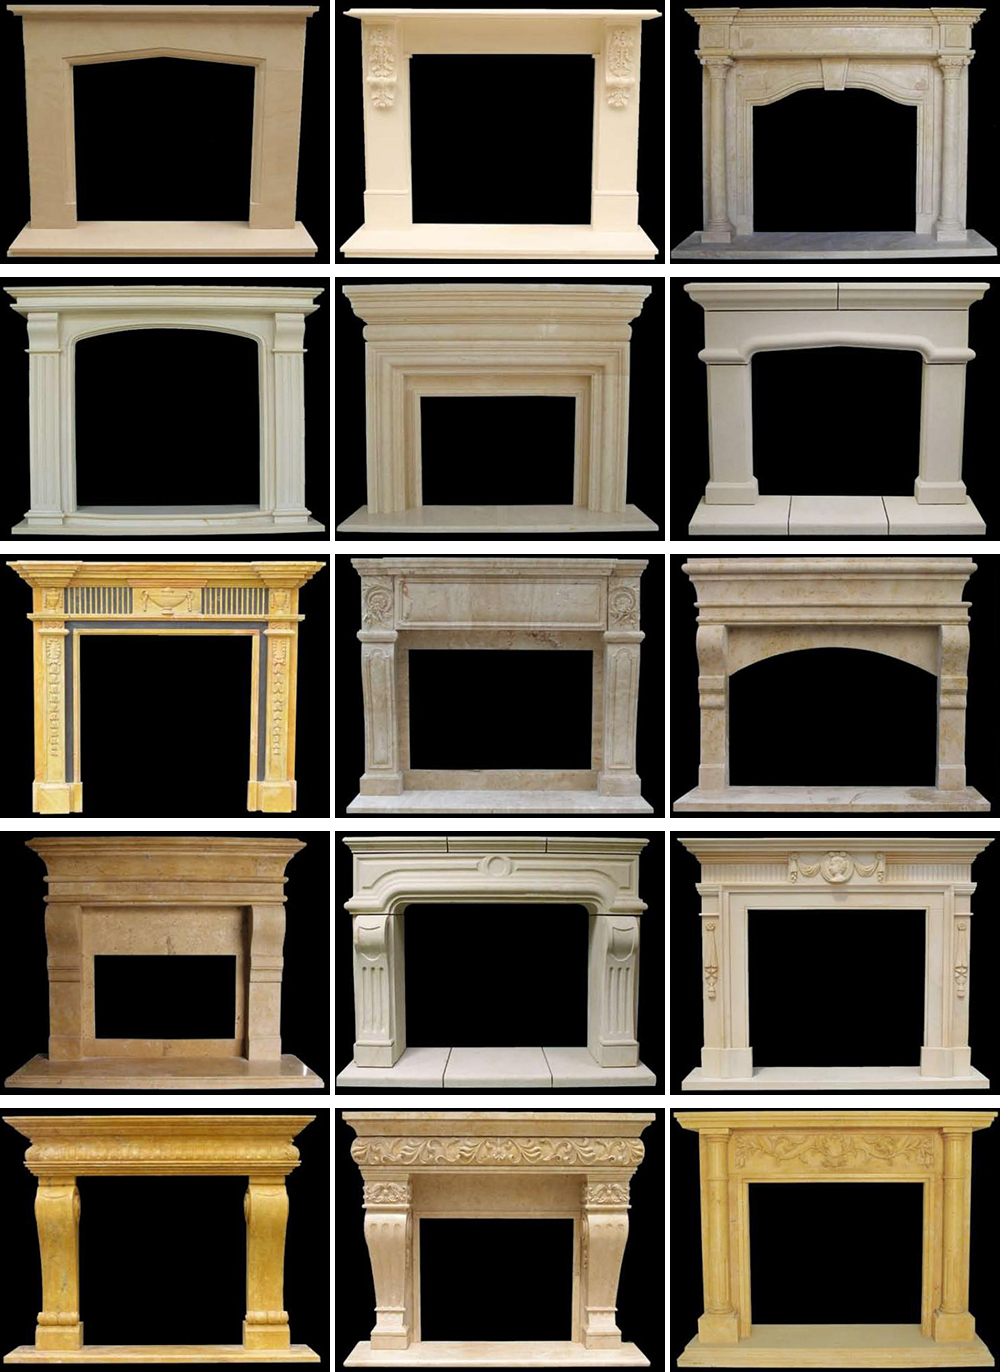 B marble-fireplace 3